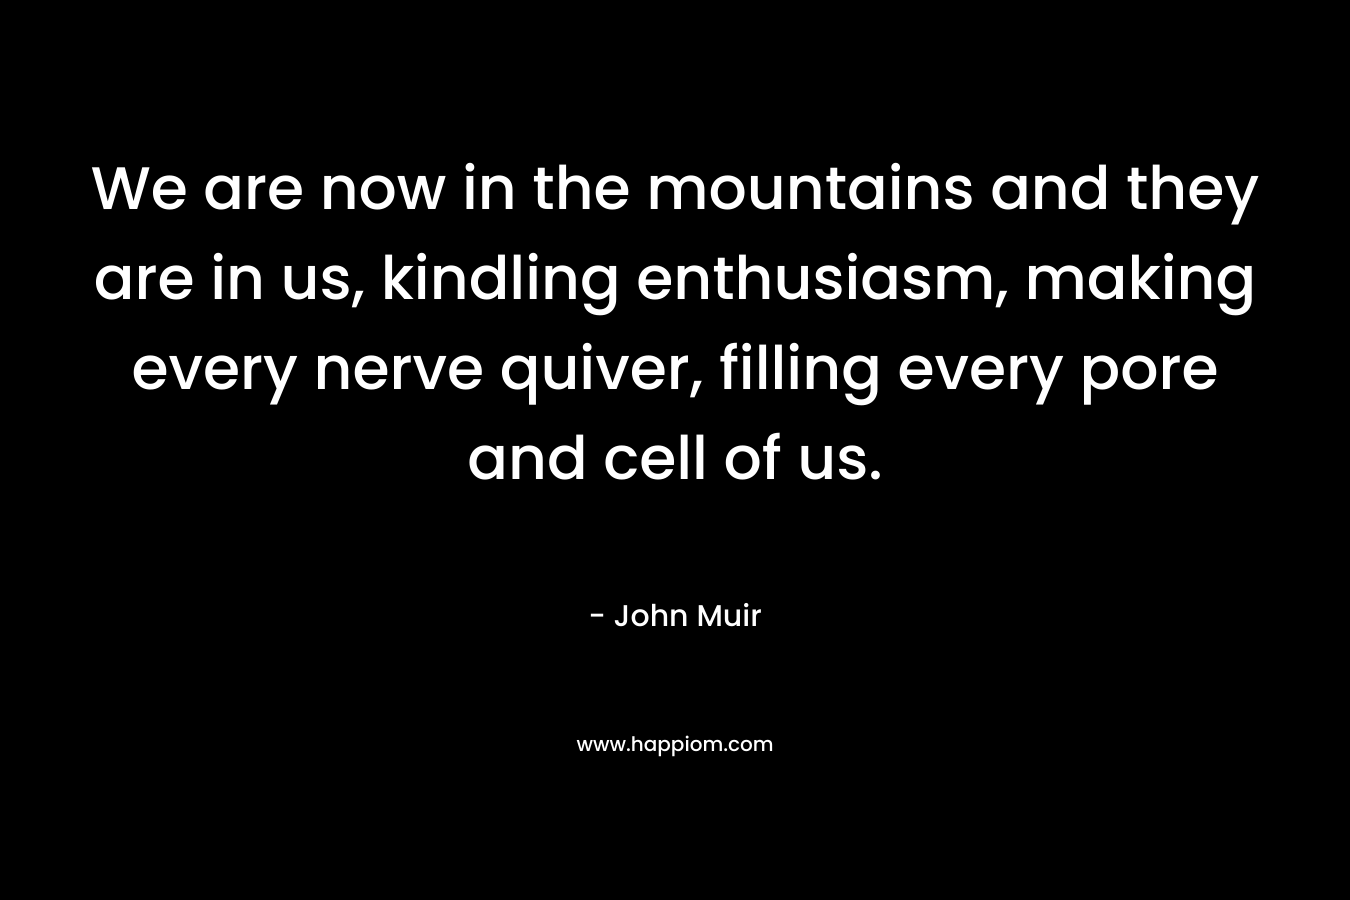 We are now in the mountains and they are in us, kindling enthusiasm, making every nerve quiver, filling every pore and cell of us. – John Muir